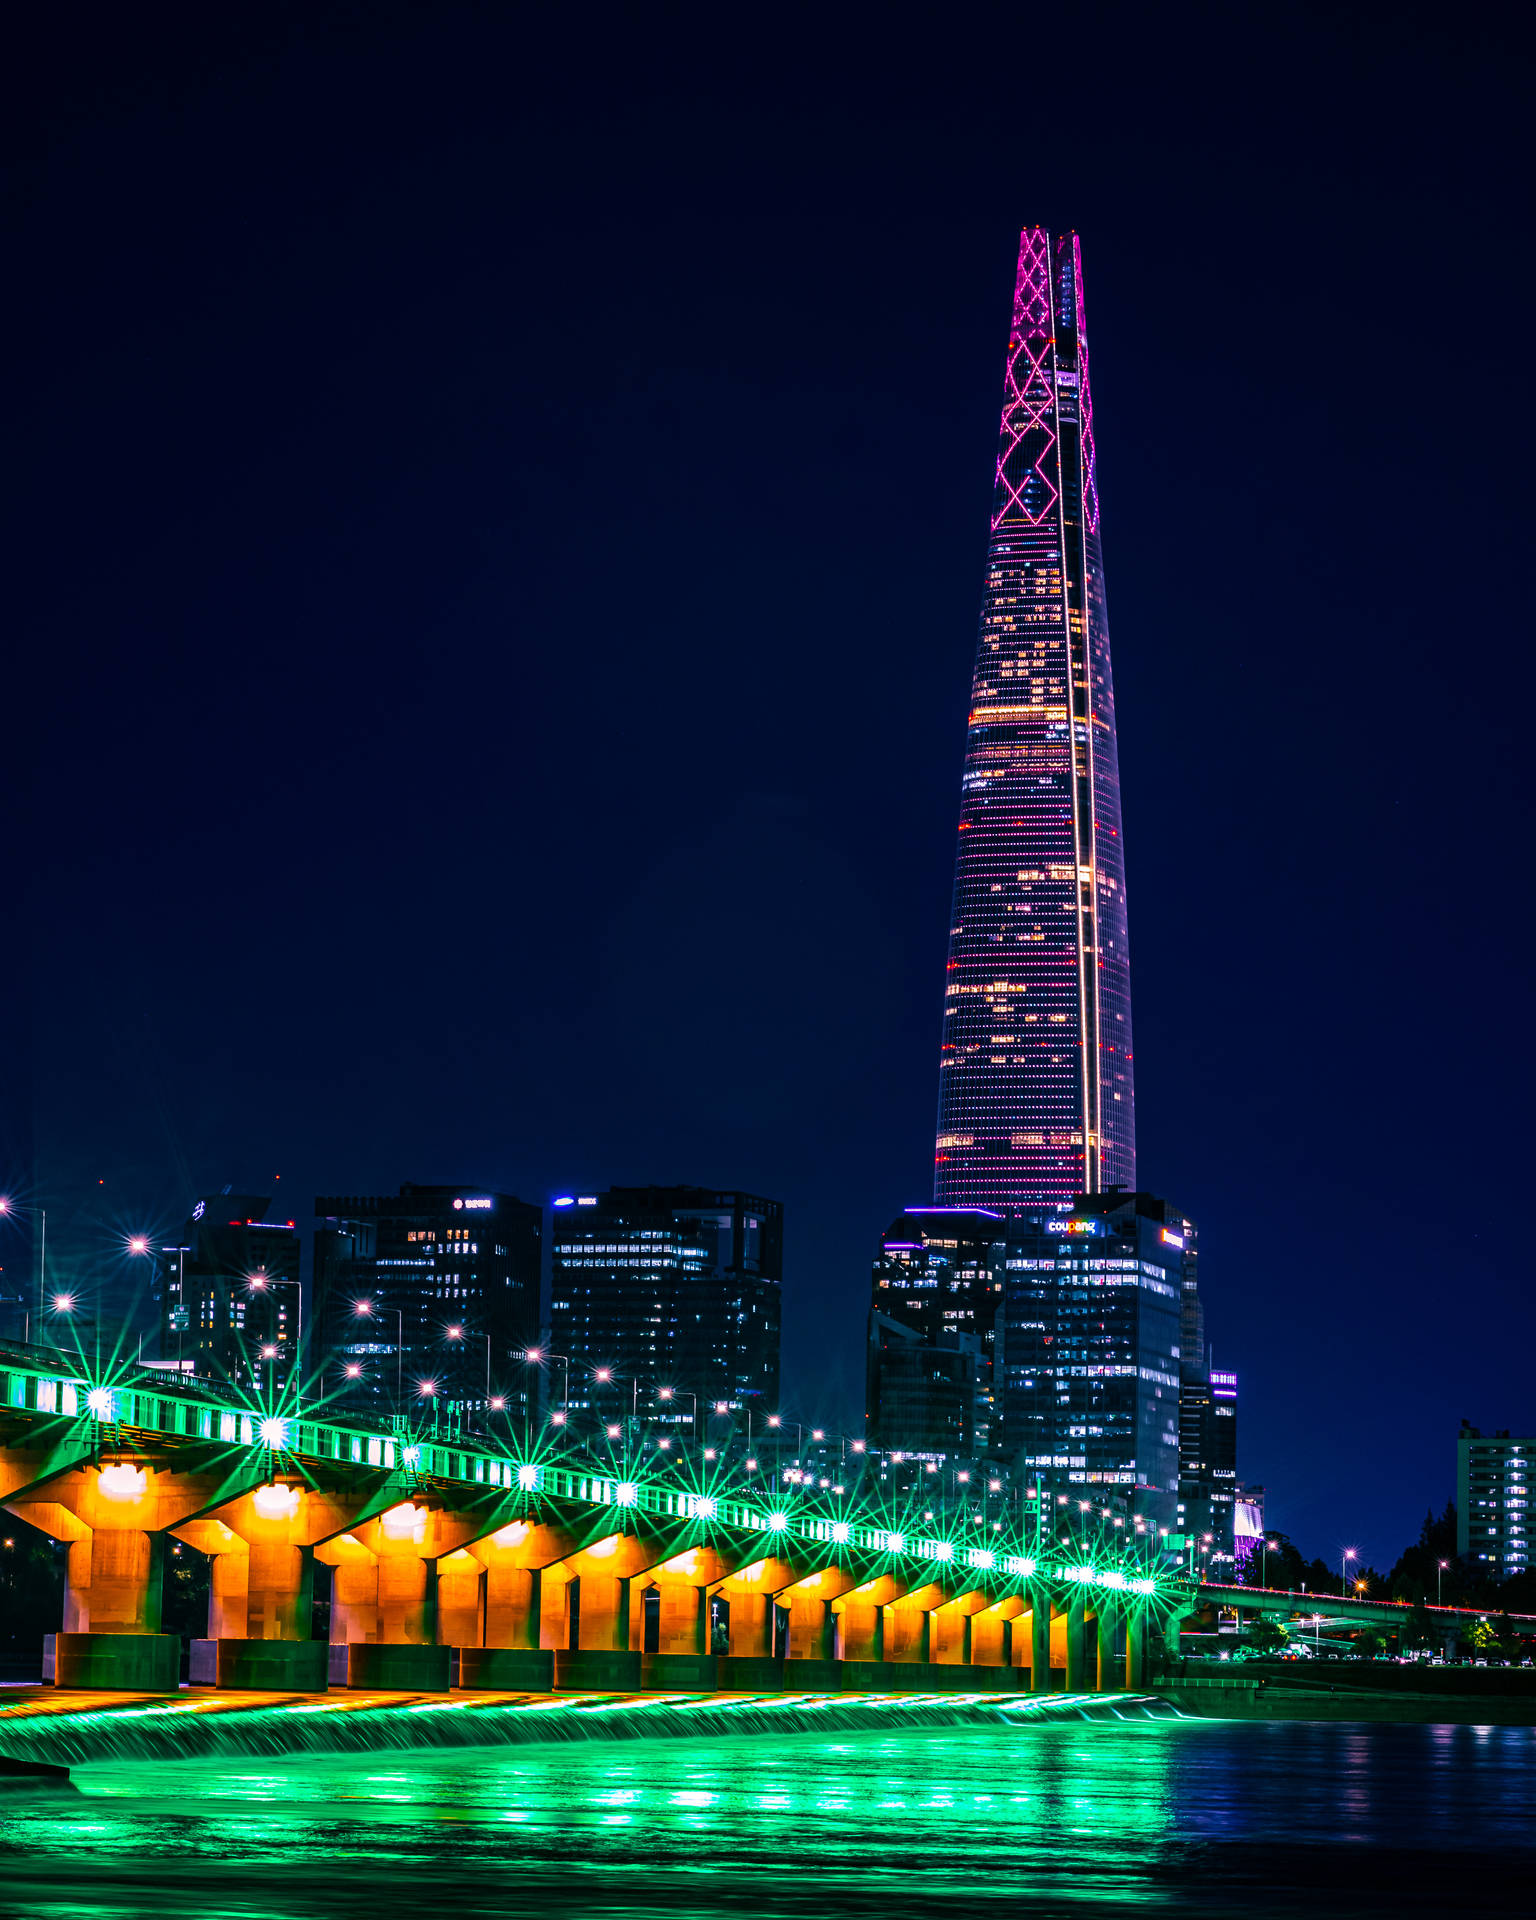 Seoul Lotte World Tower Background